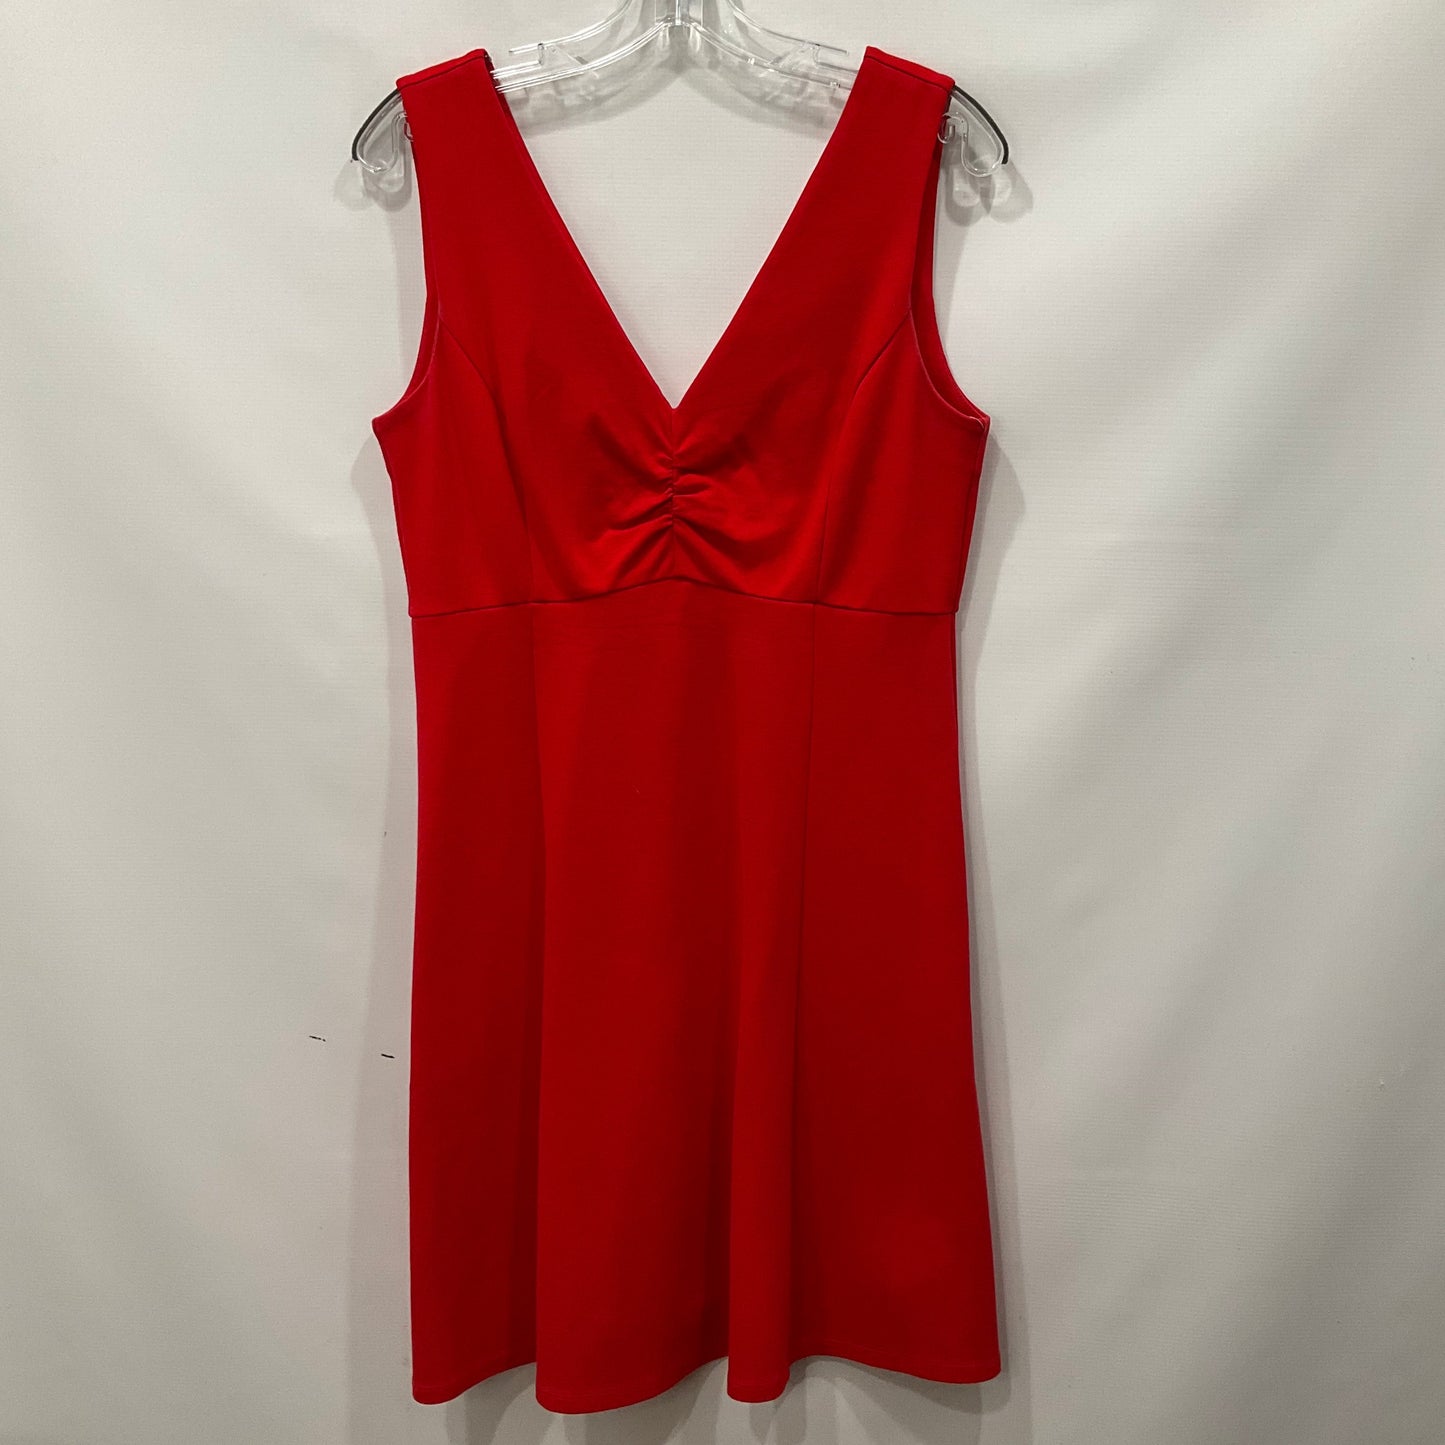 Red Dress Casual Short Kate Spade, Size 8